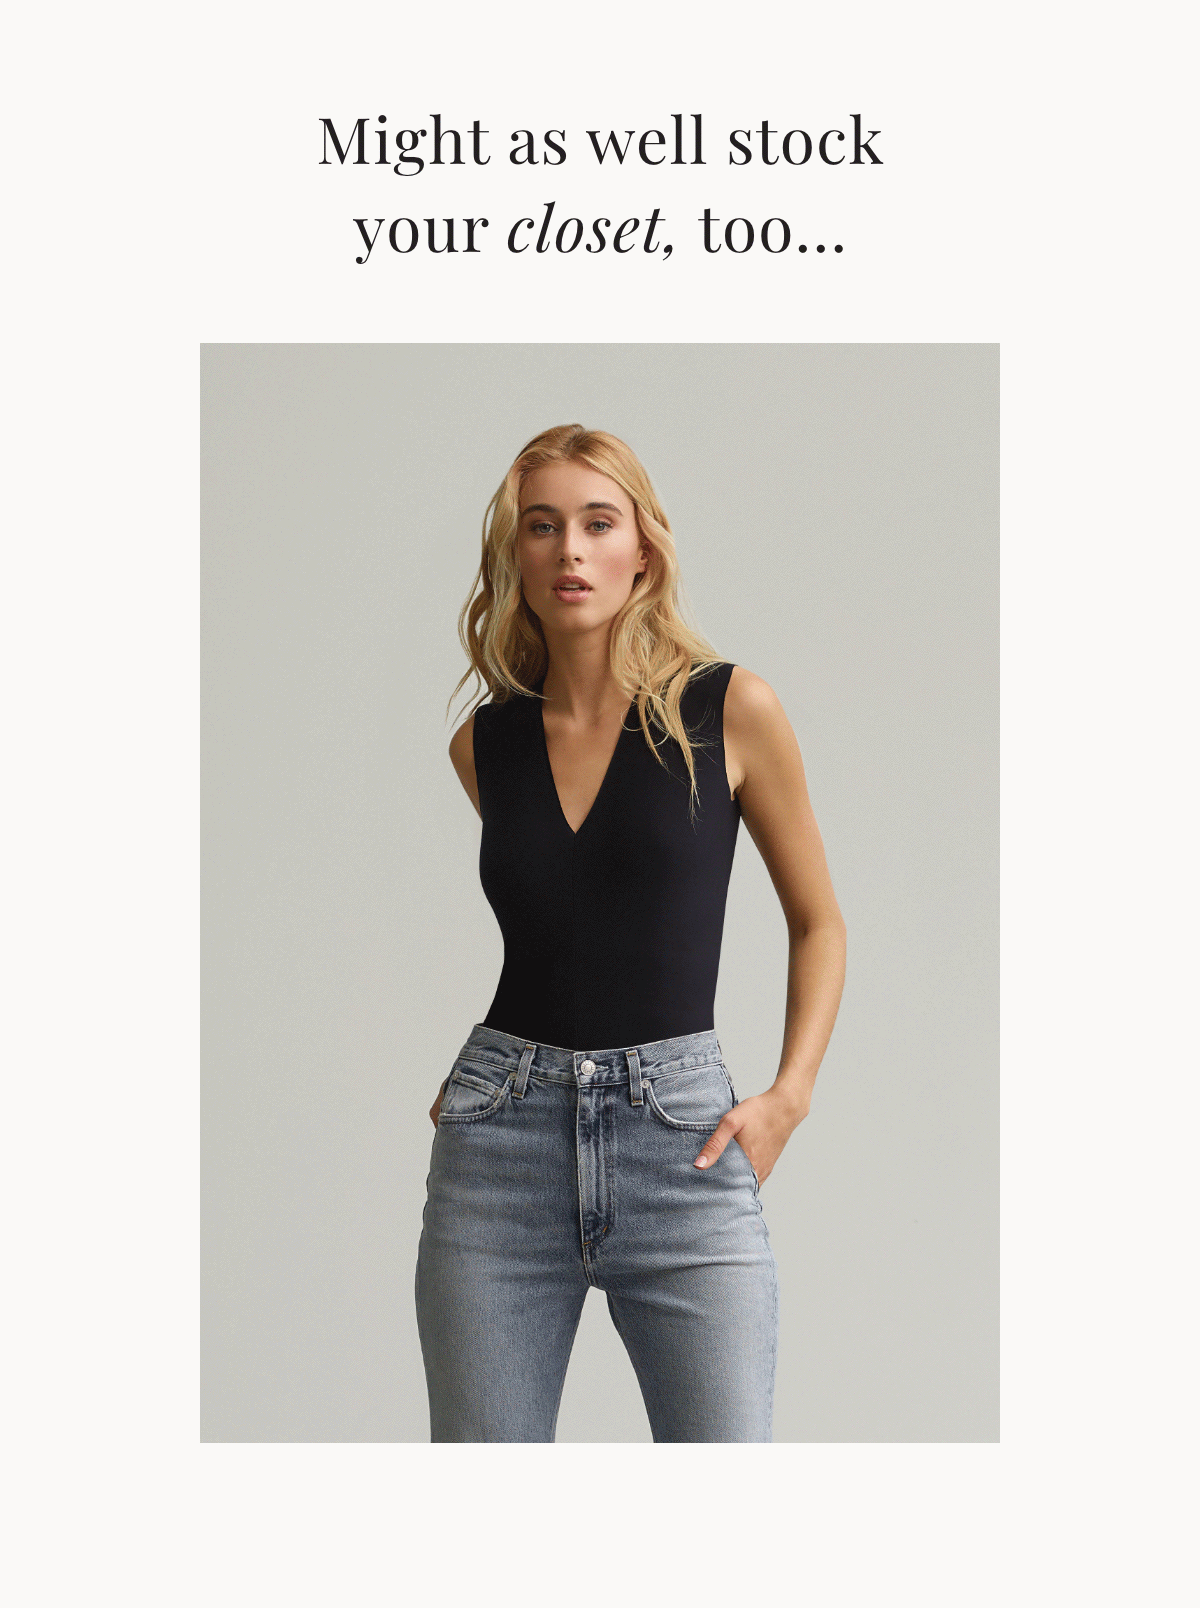 Might as well stock your closet, too...